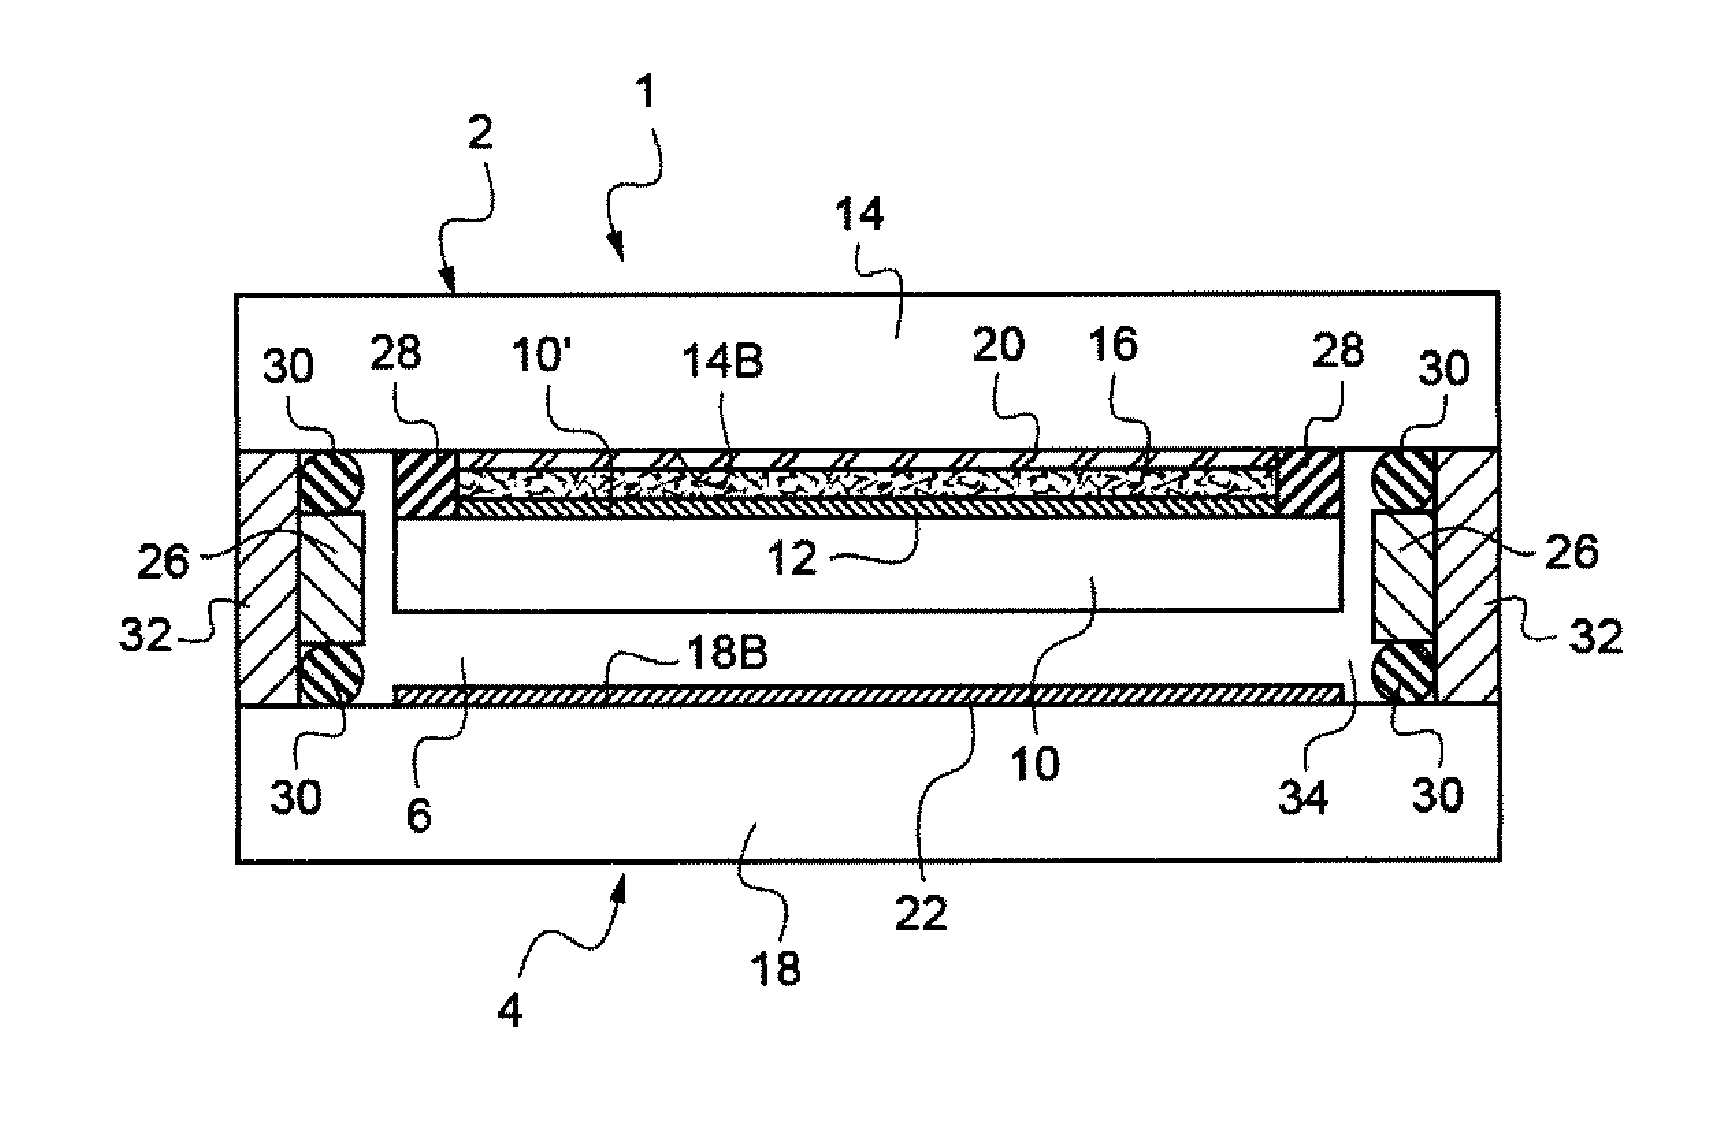 Electrochemical glazing having electrically controllable optical and energy-related properties